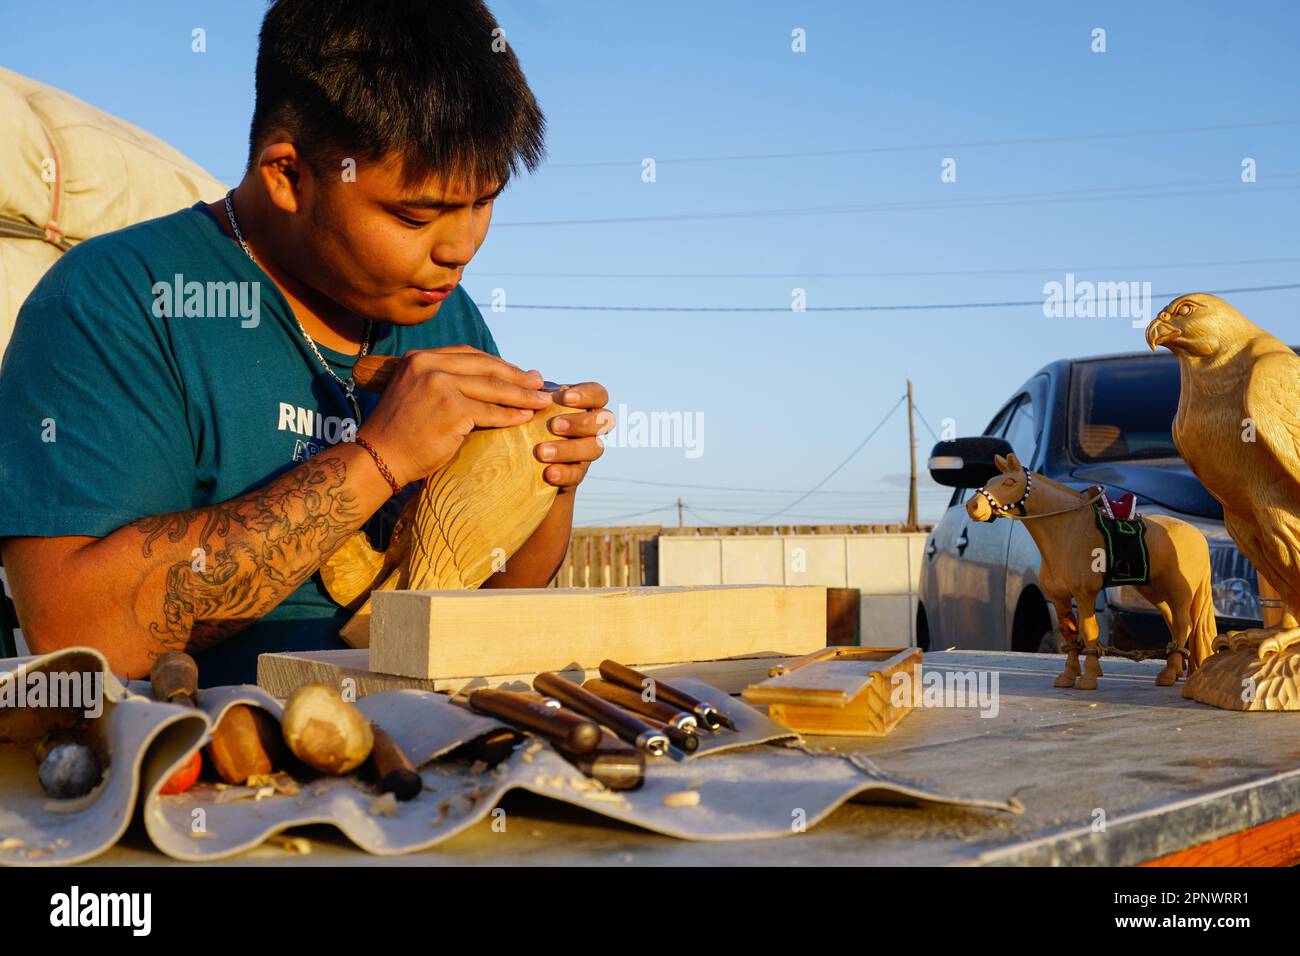 Altangerel Munkhjargal carves a wooden falcon in Dalanzadgad, Umnugovi province, Mongolia on August 23, 2022. Altangerel, who took a gap year during the coronavirus pandemic, started carving in his idle time. (Uranchimeg Tsoghuu/Global Press Journal) Stock Photo